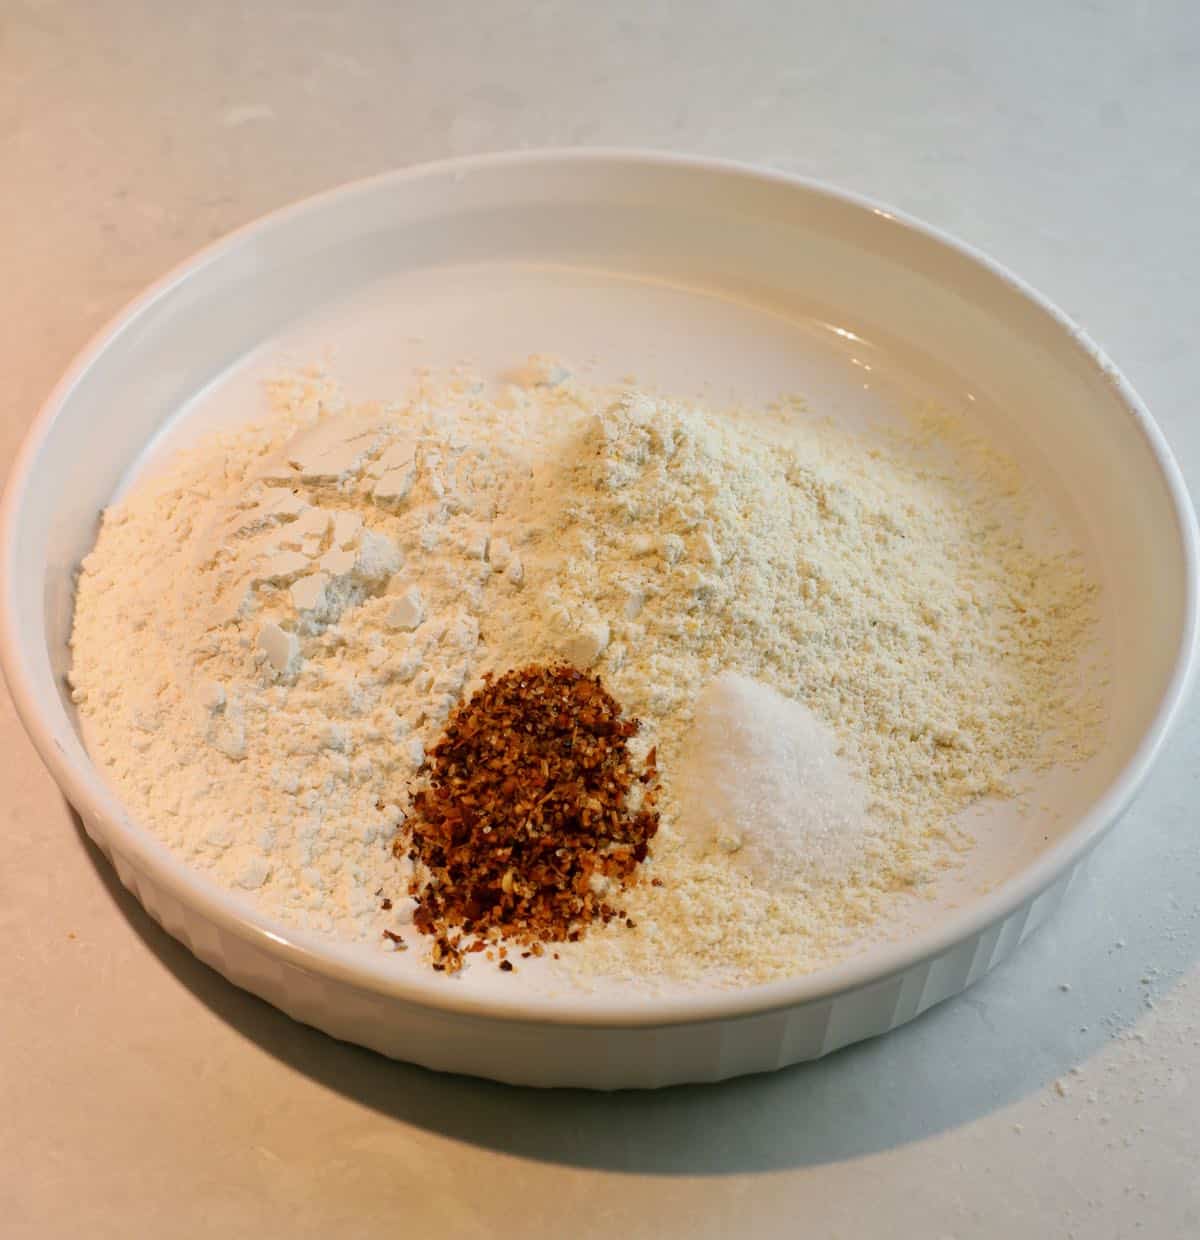 Cornmeal, flour, and Creole seasoning in a white shallow bowl.